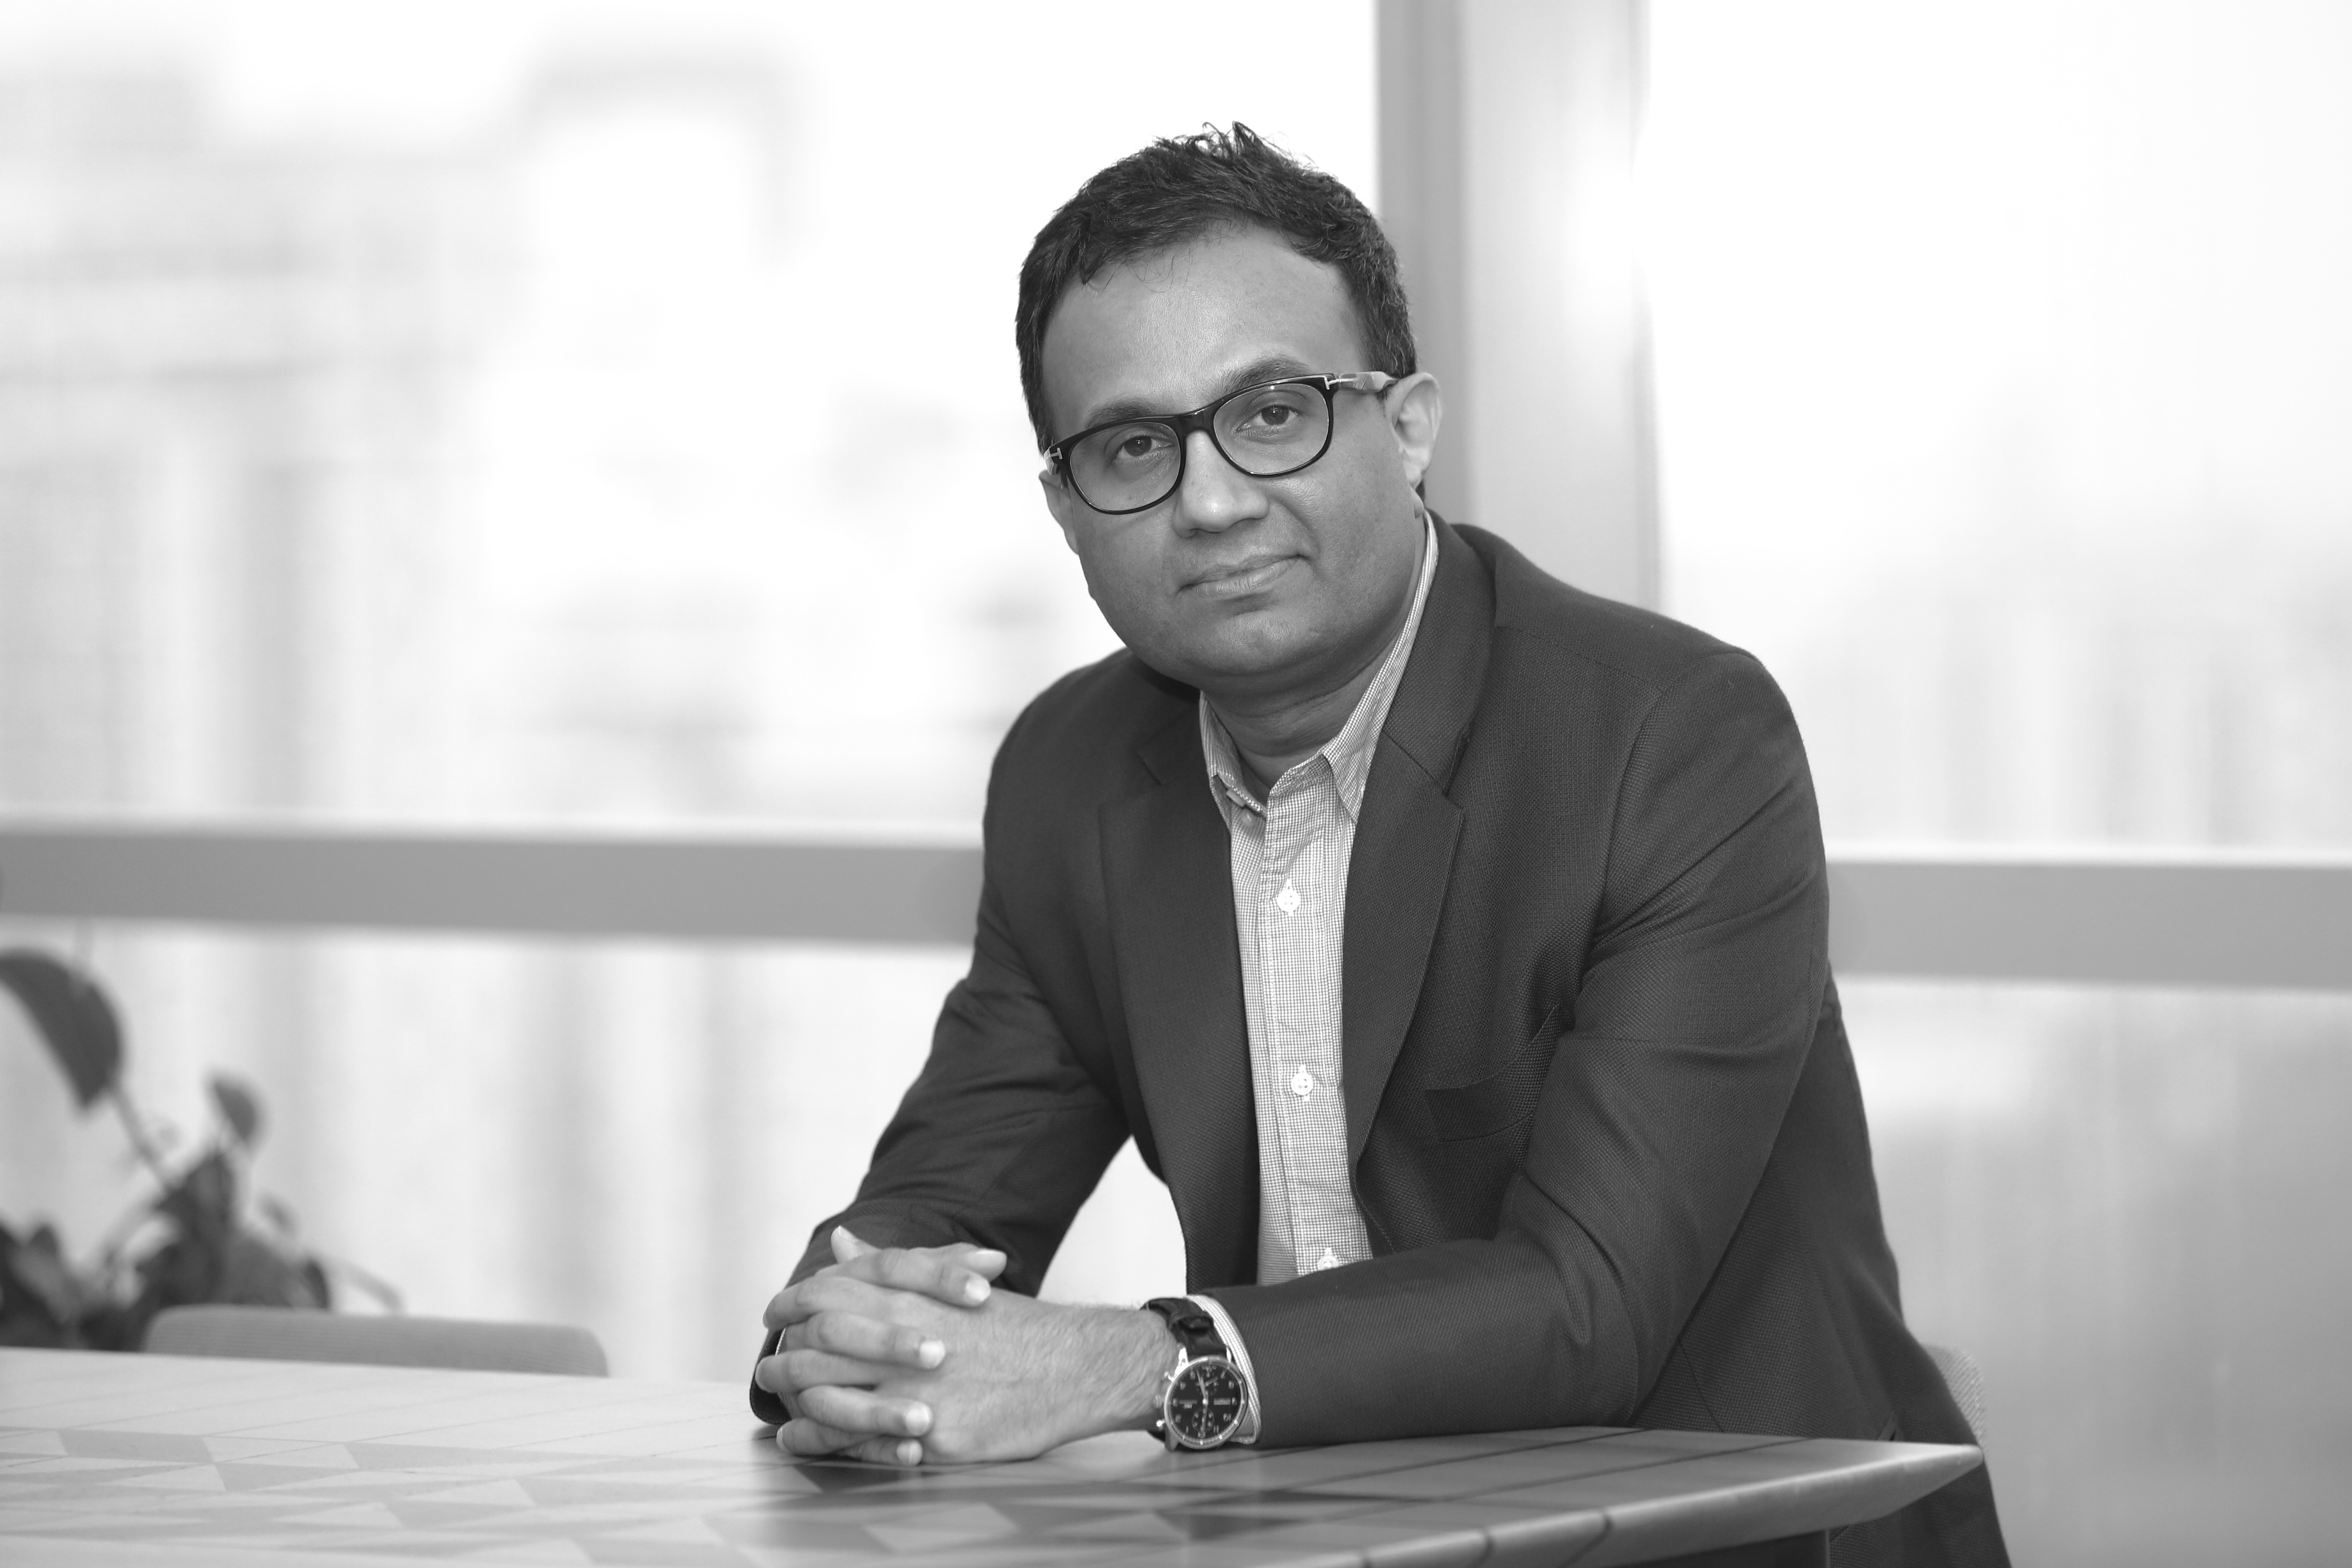 Ajit in black and white wearing a suit, he wears glasses and a watch on his wrist. He looks into the camera smiling slightly.